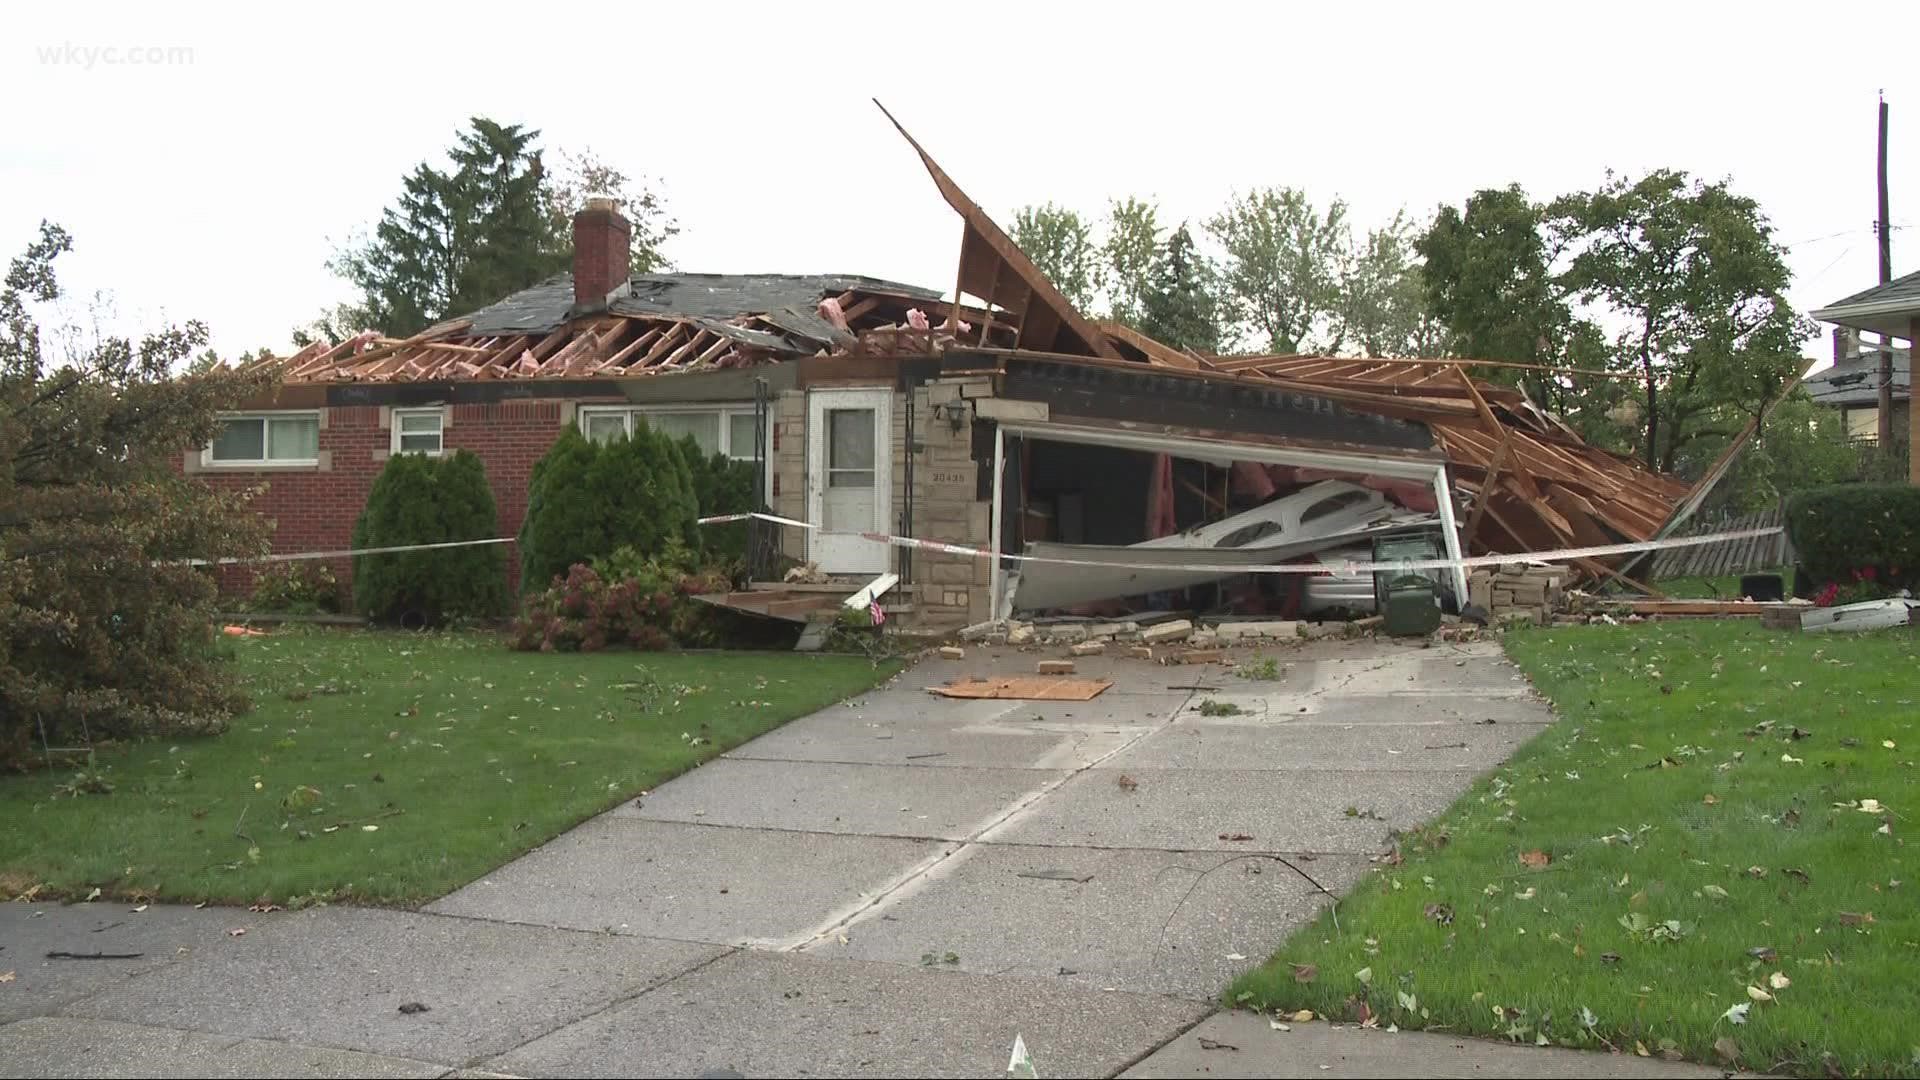 Homes and properties across the area were damaged by severe weather, including confirmed tornadoes, Thursday.